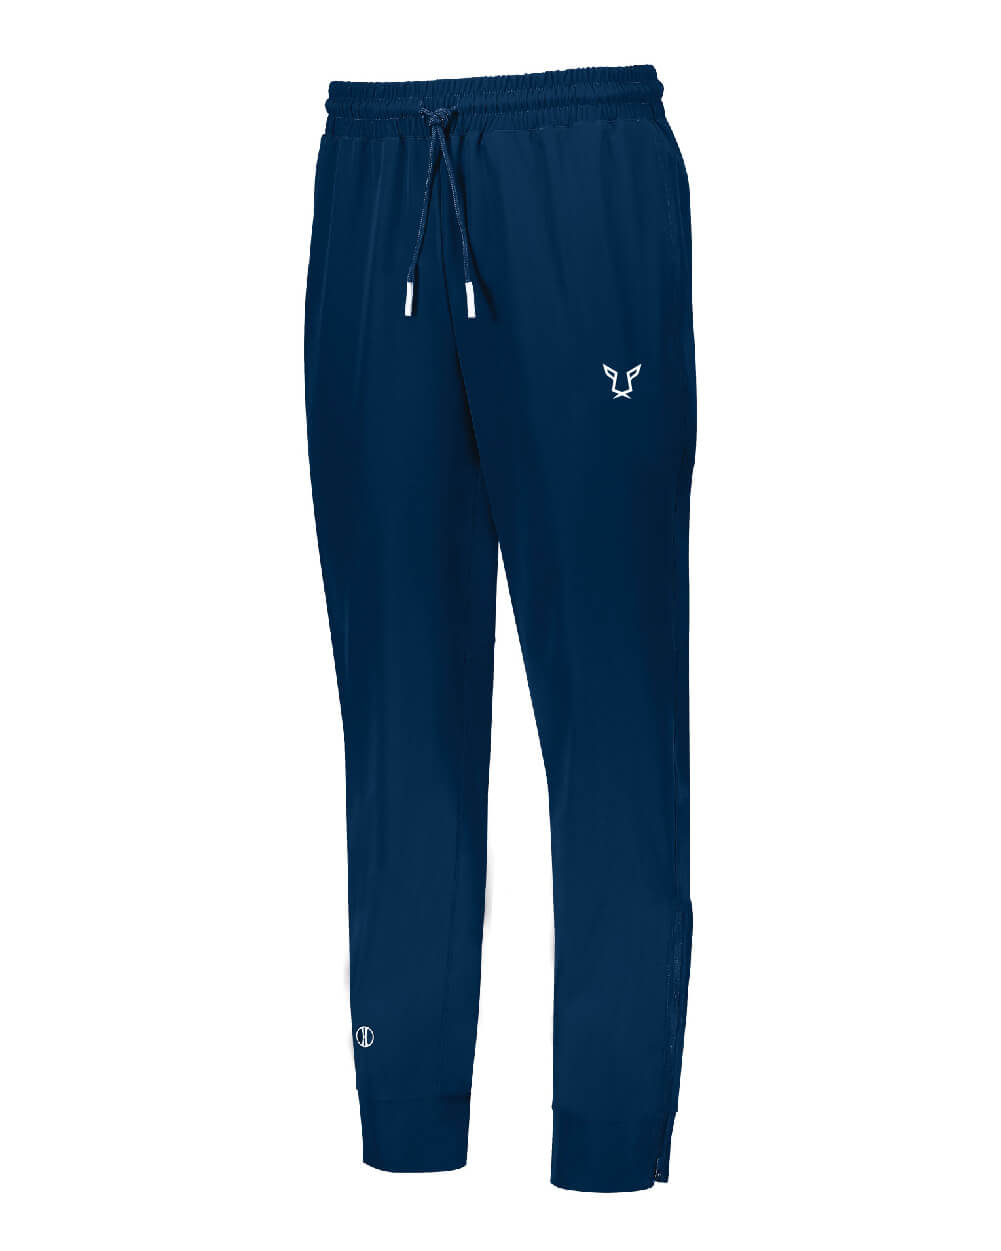 Men's Navy Evolution Performance Joggers by Odisi Apparel